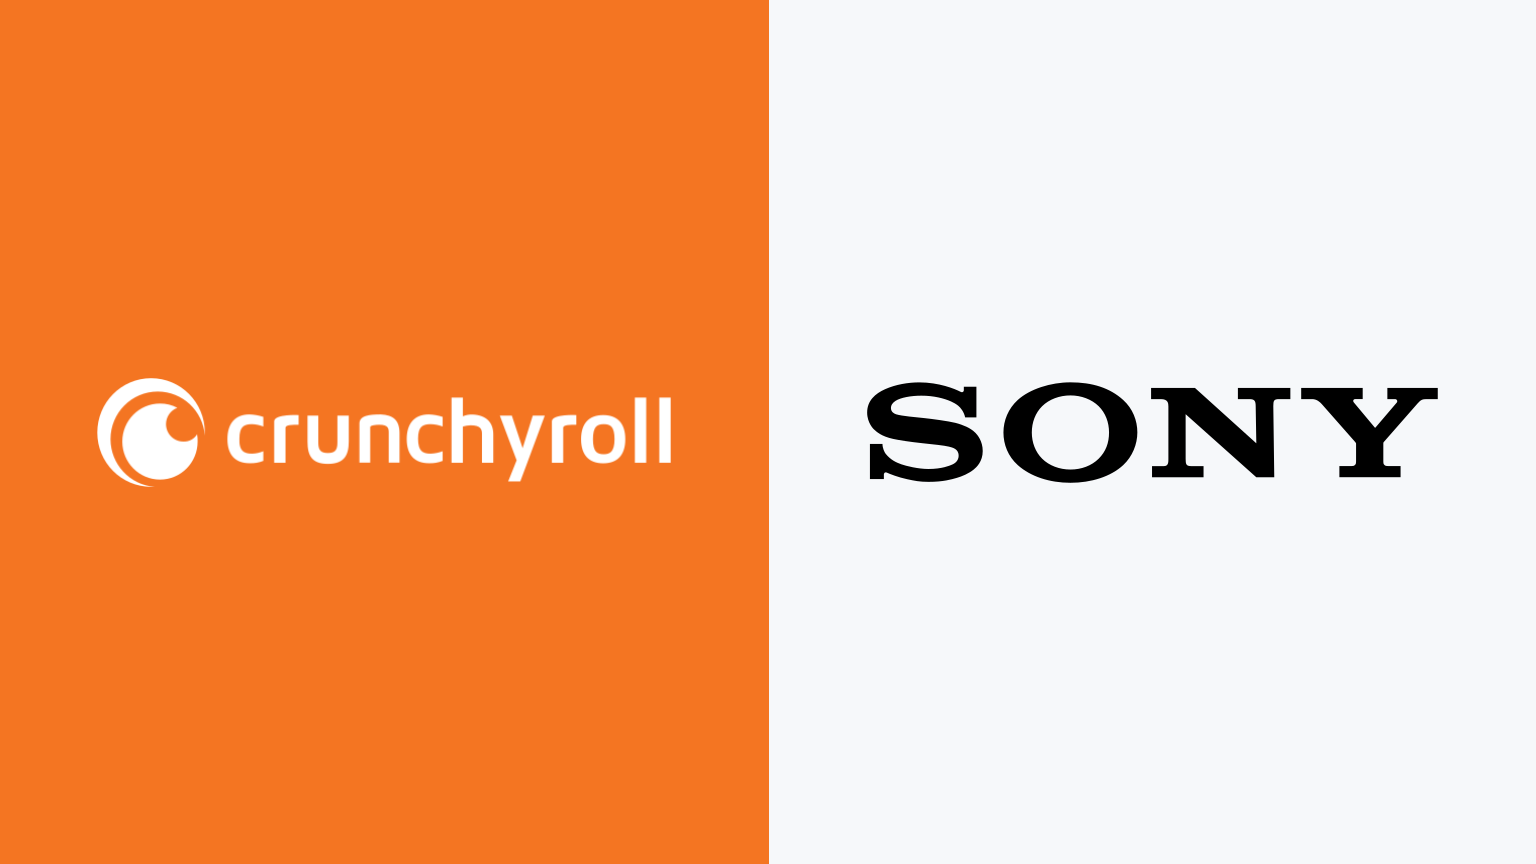 Crunchyroll has been bought by Sony